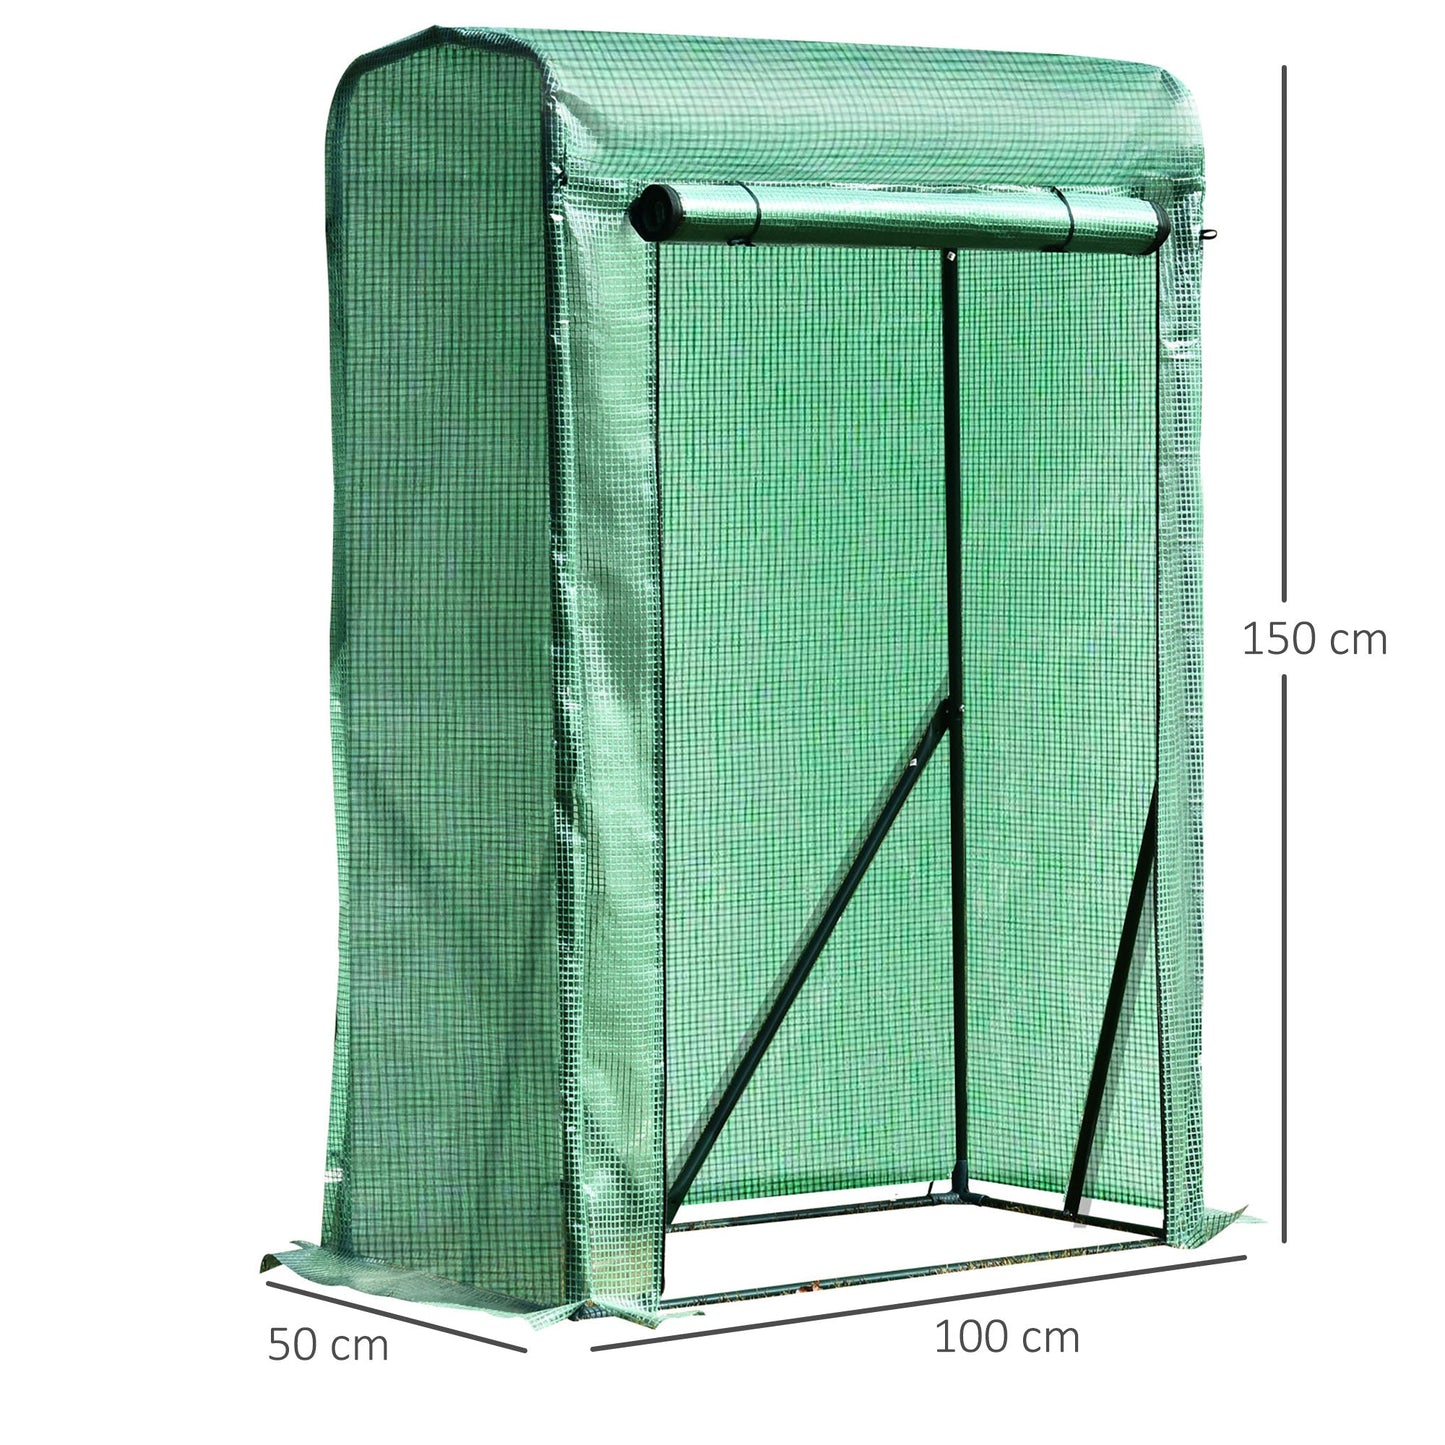 100L x 50W x 150HCM Outdoor PE Greenhouse Steel Frame Plant Cover with Zipper - Green